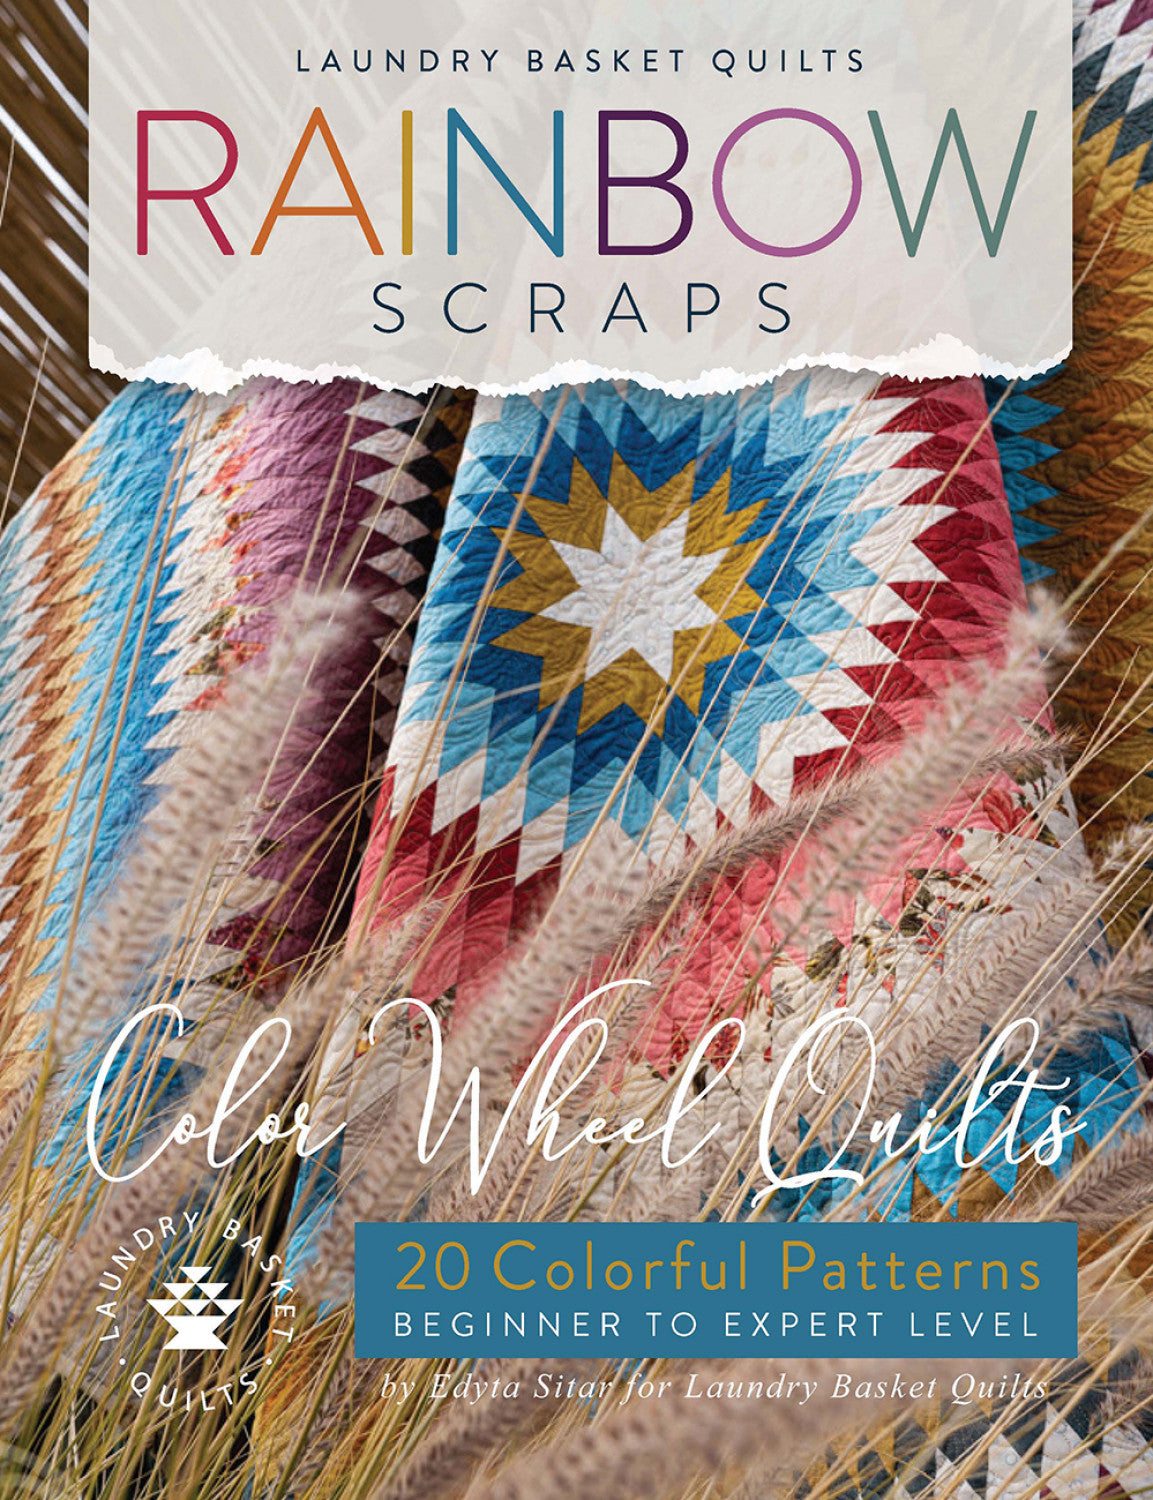 Rainbow Scraps Quilt Book by Edyta Sitar of Laundry Basket Quilts